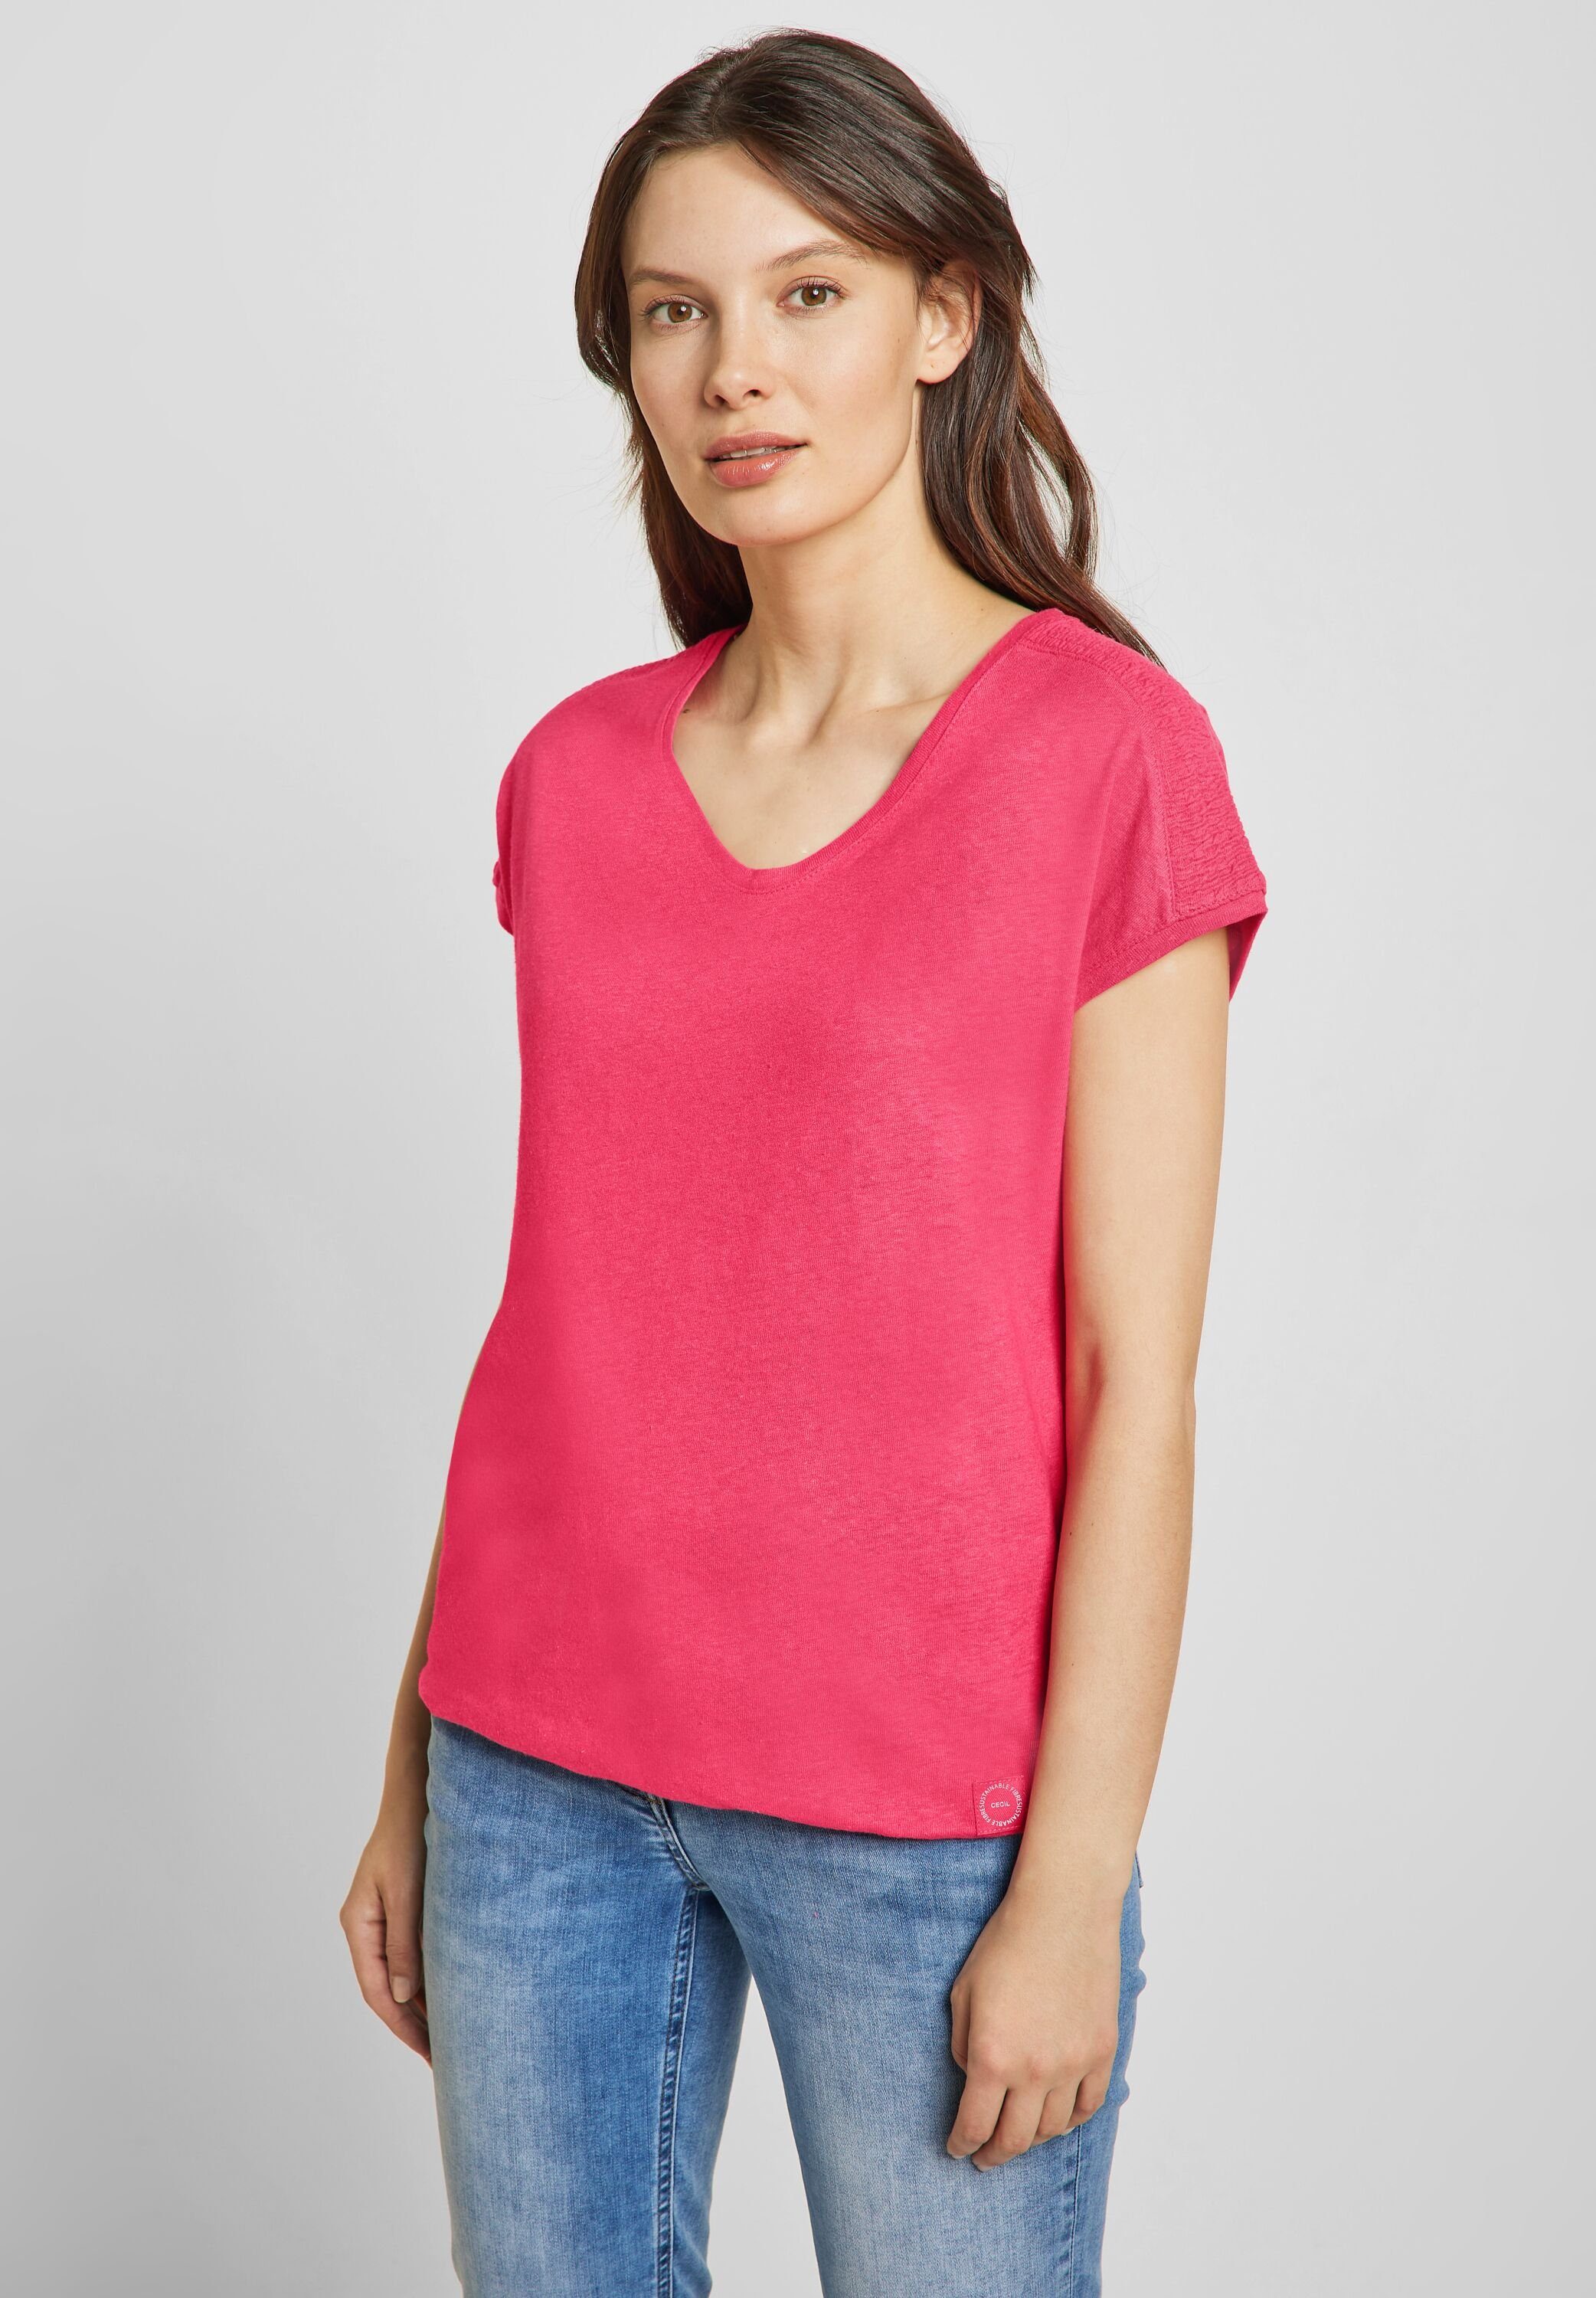 Cecil T-Shirt in red strawberry Unifarbe